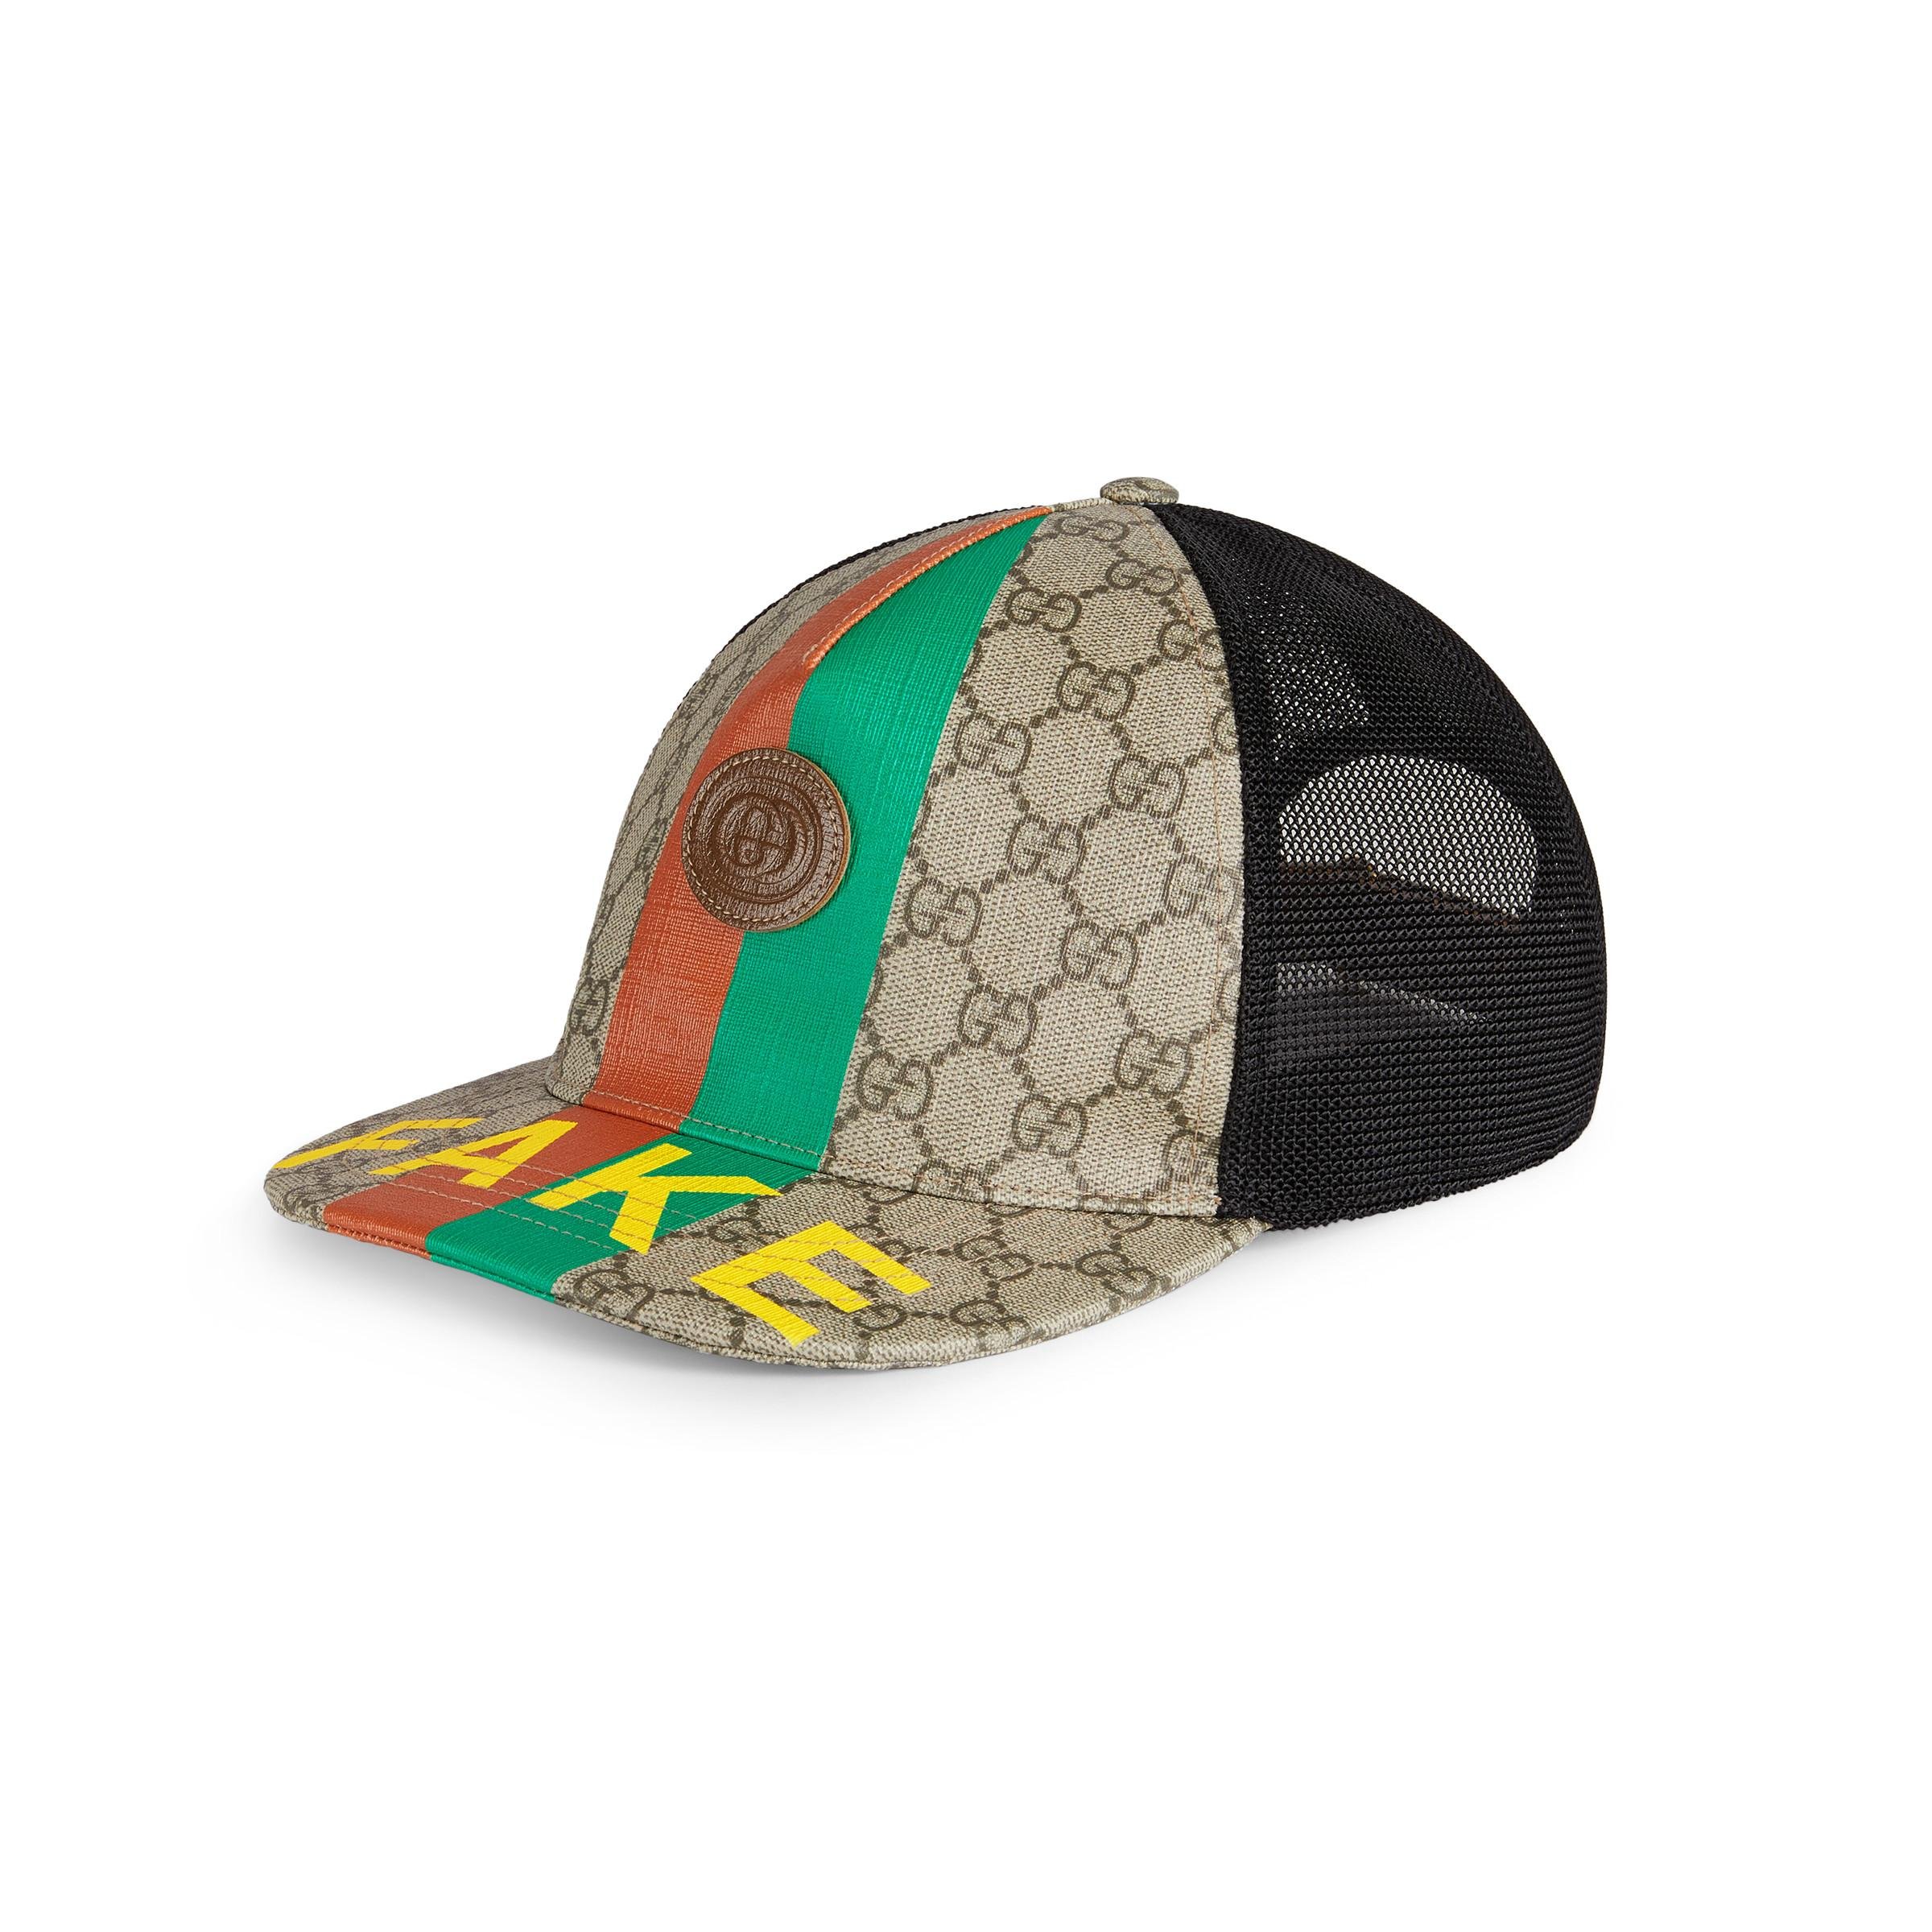 real gucci hat